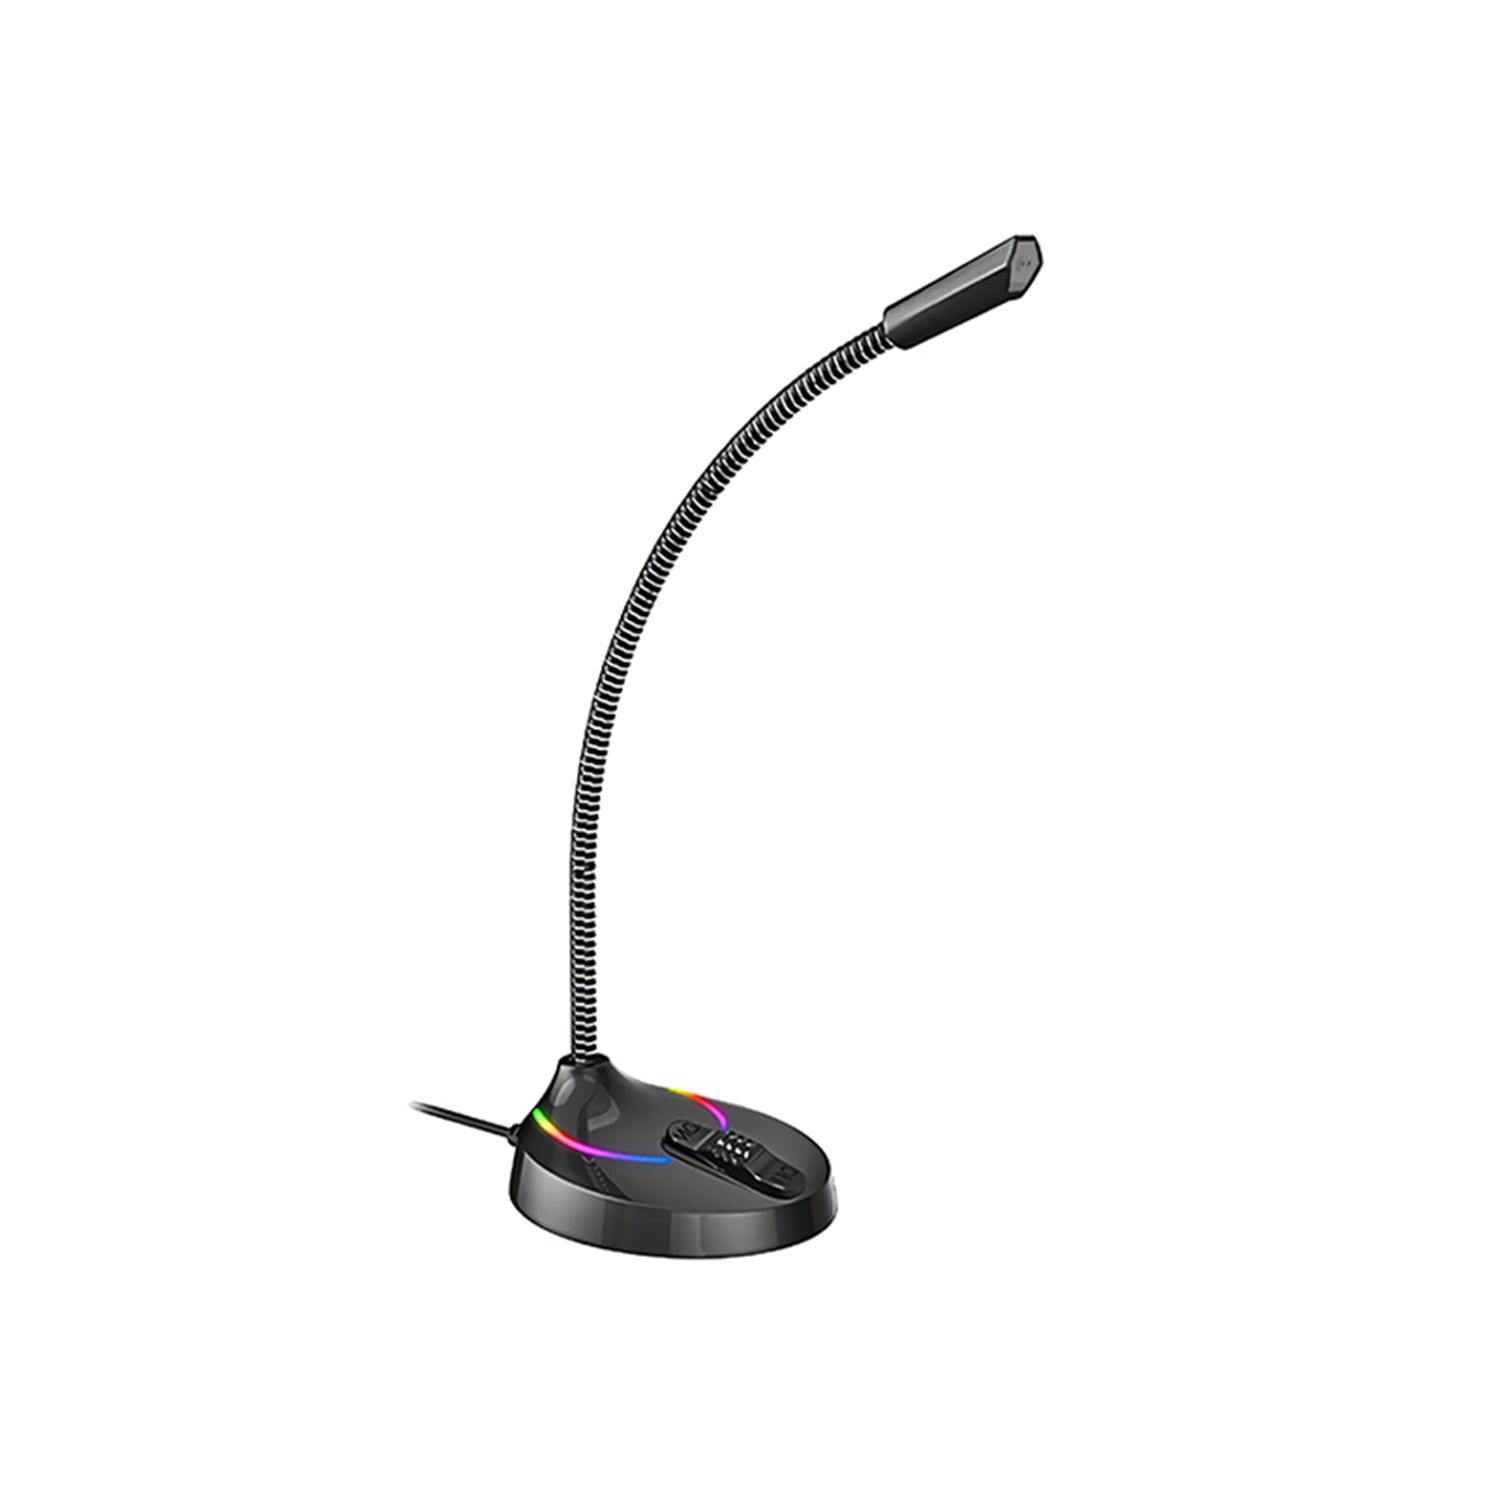 HAVIT GK55 USB Gaming Microphone with Mute Button & LED Light for Computer, PC, Laptop, Mac